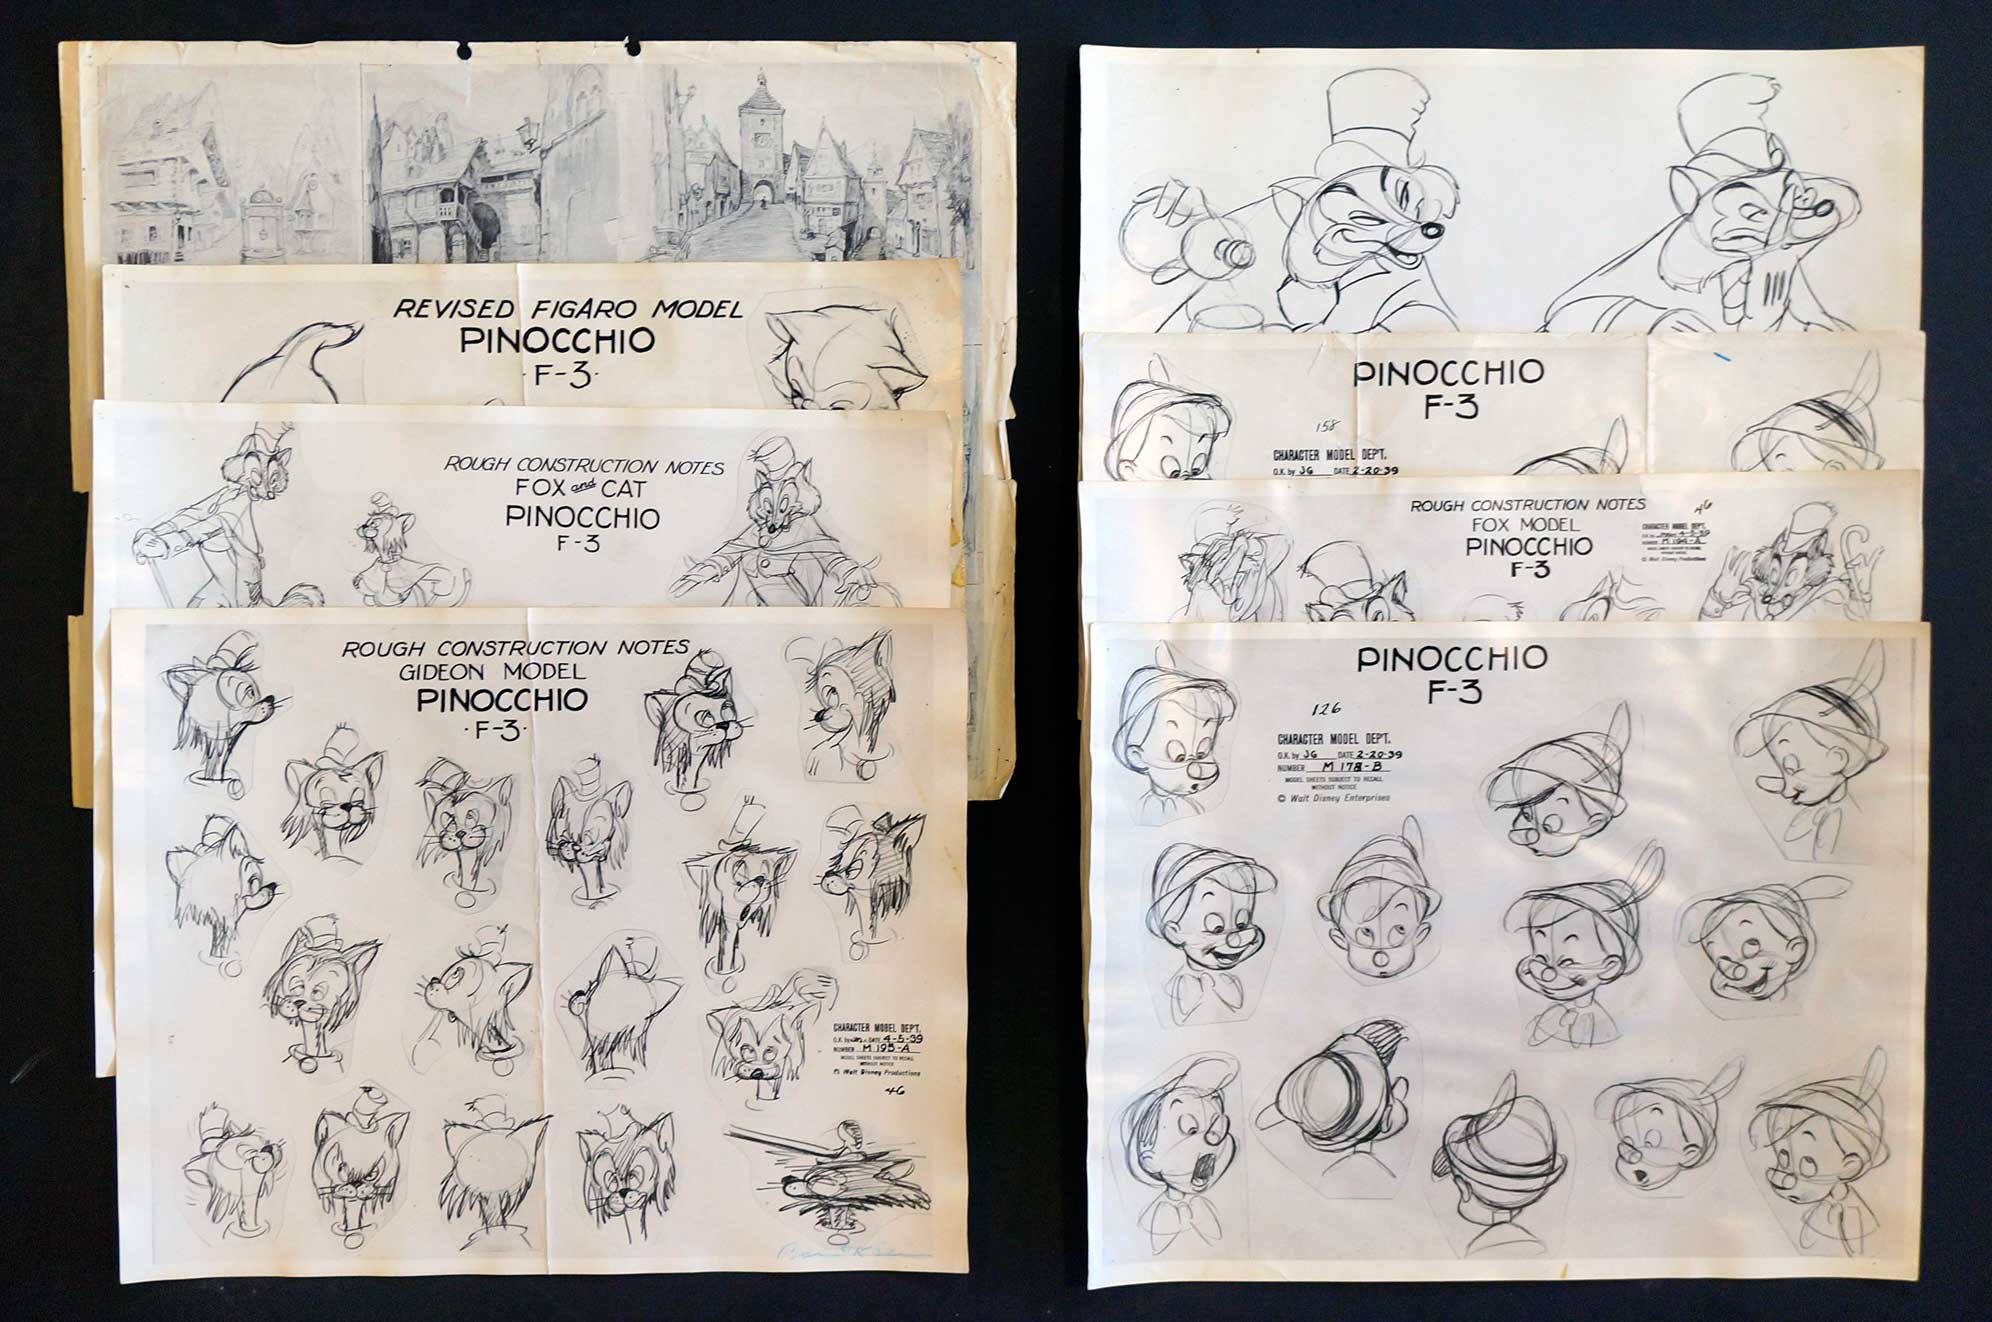 Disney Model Sheets from Pinocchio